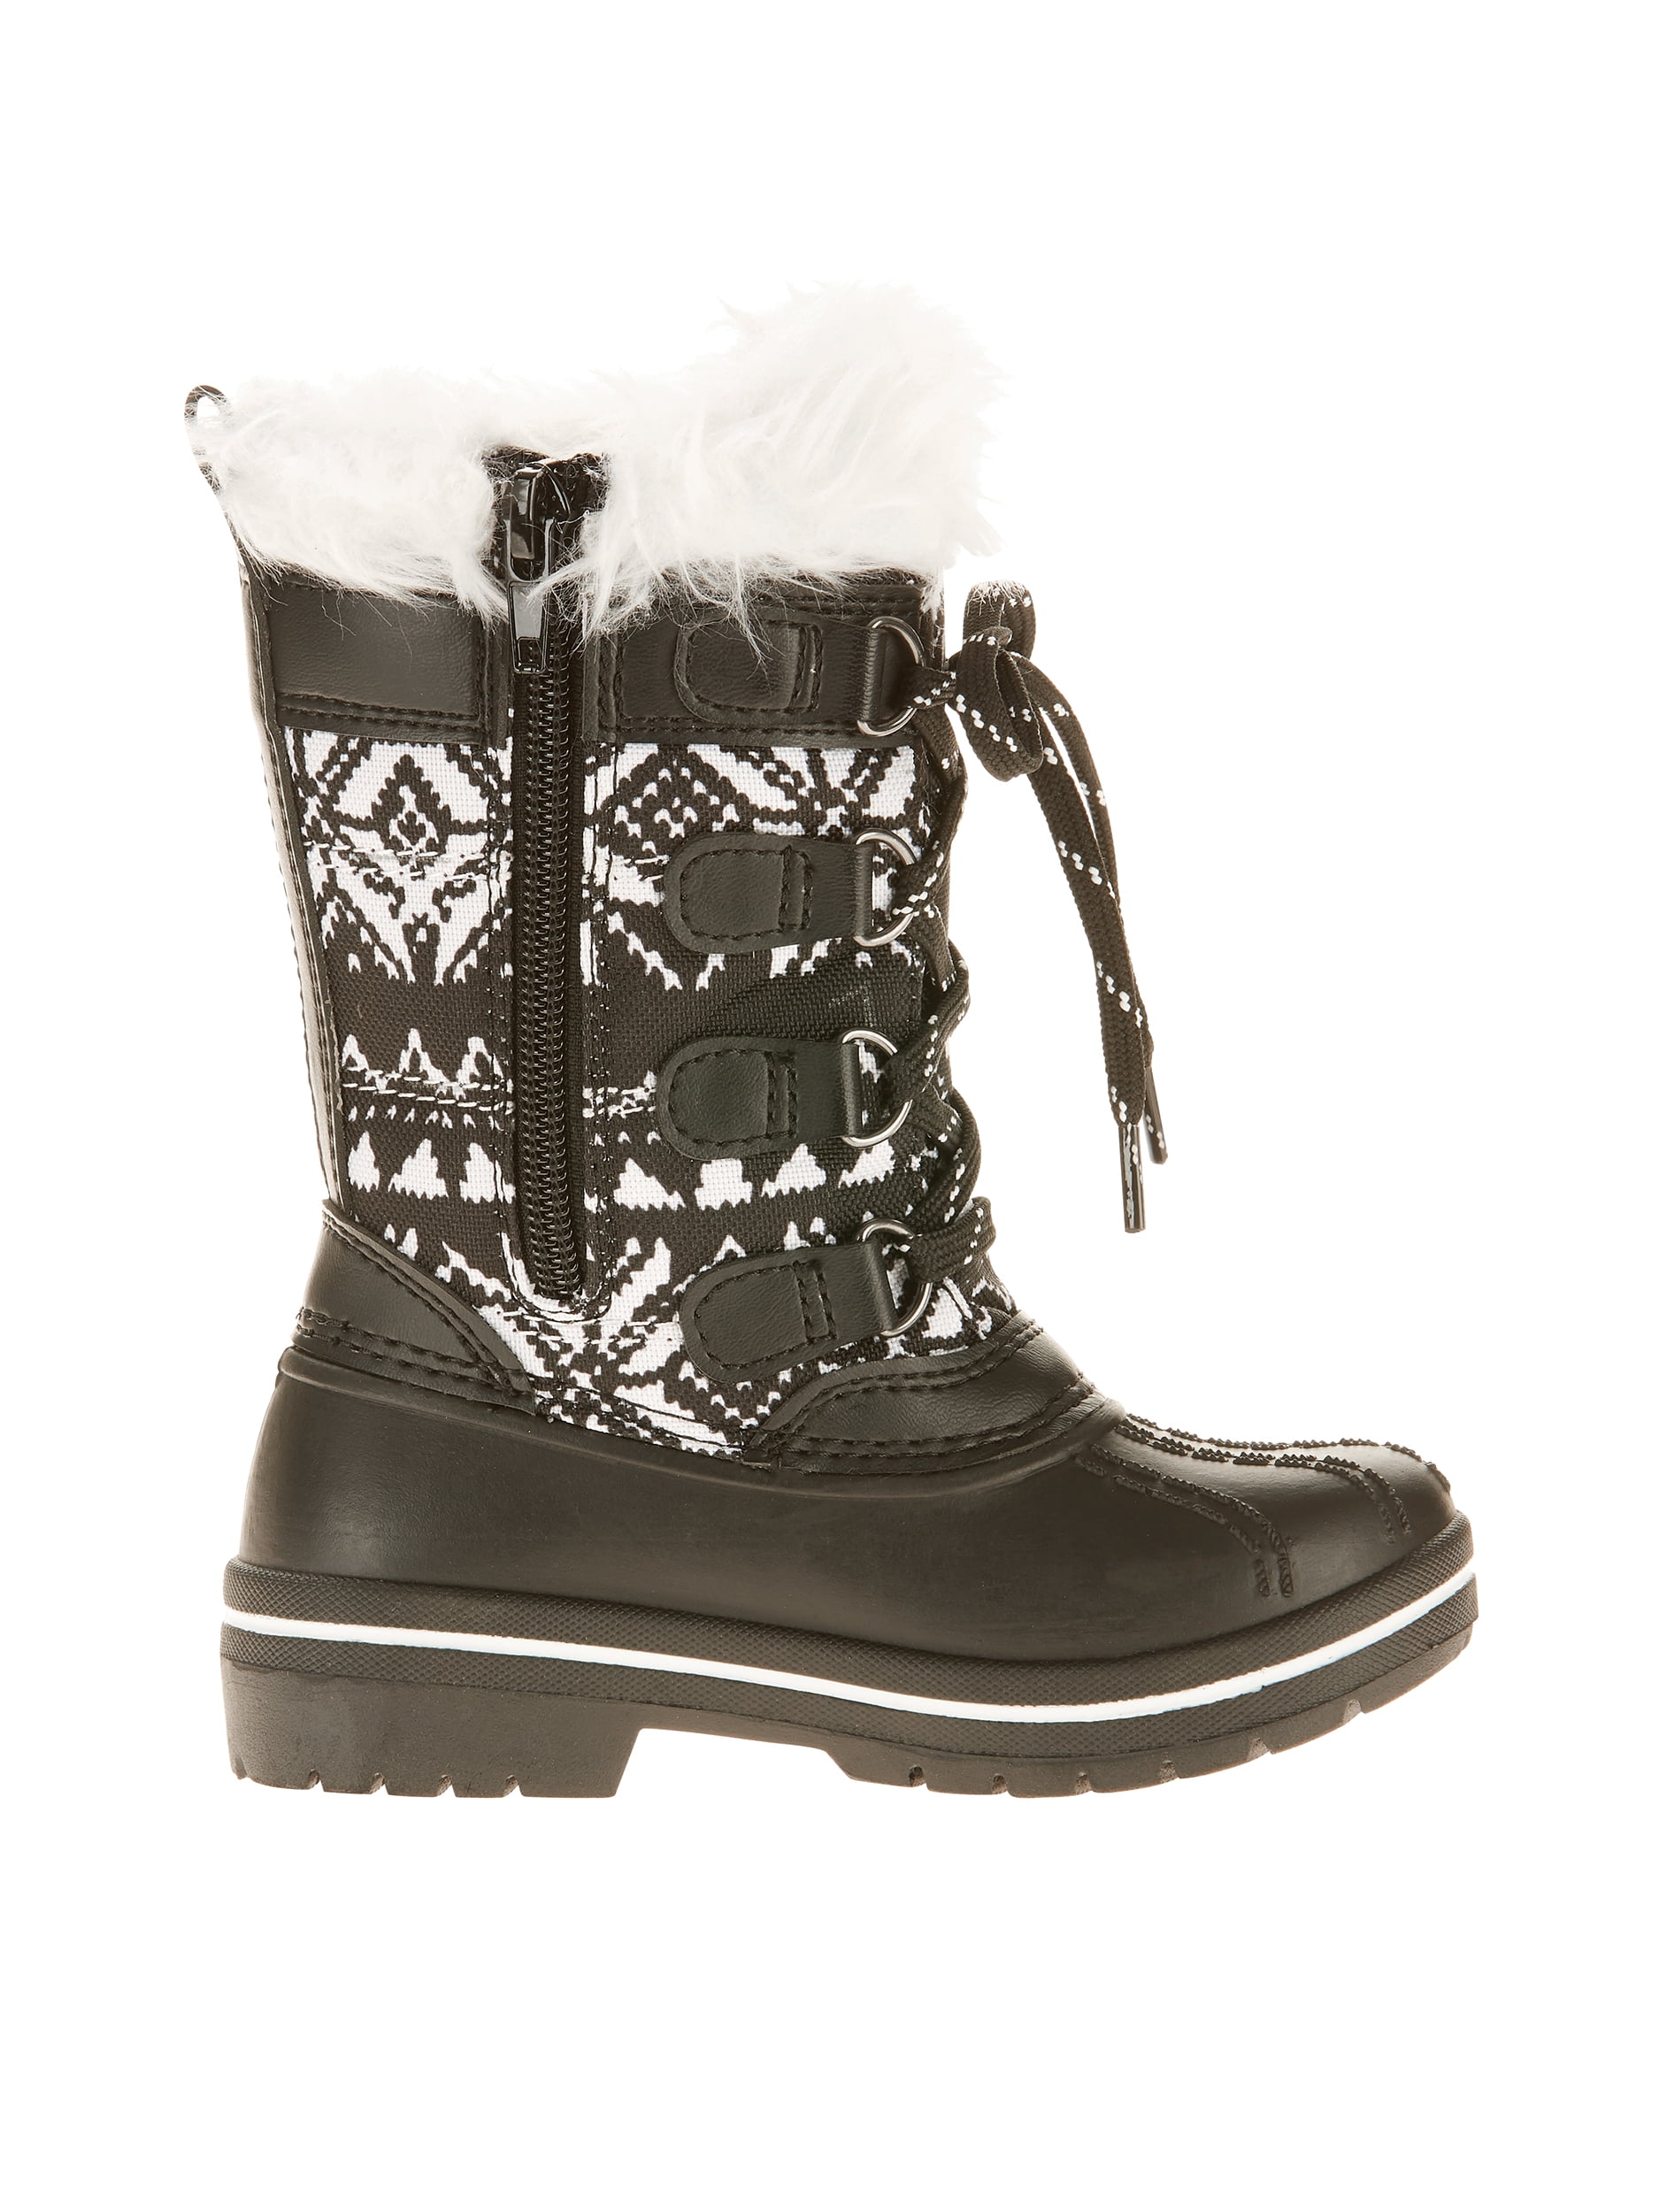 Girls Canyon River Blues Abigail Winter Boots Chestnut M35 New 